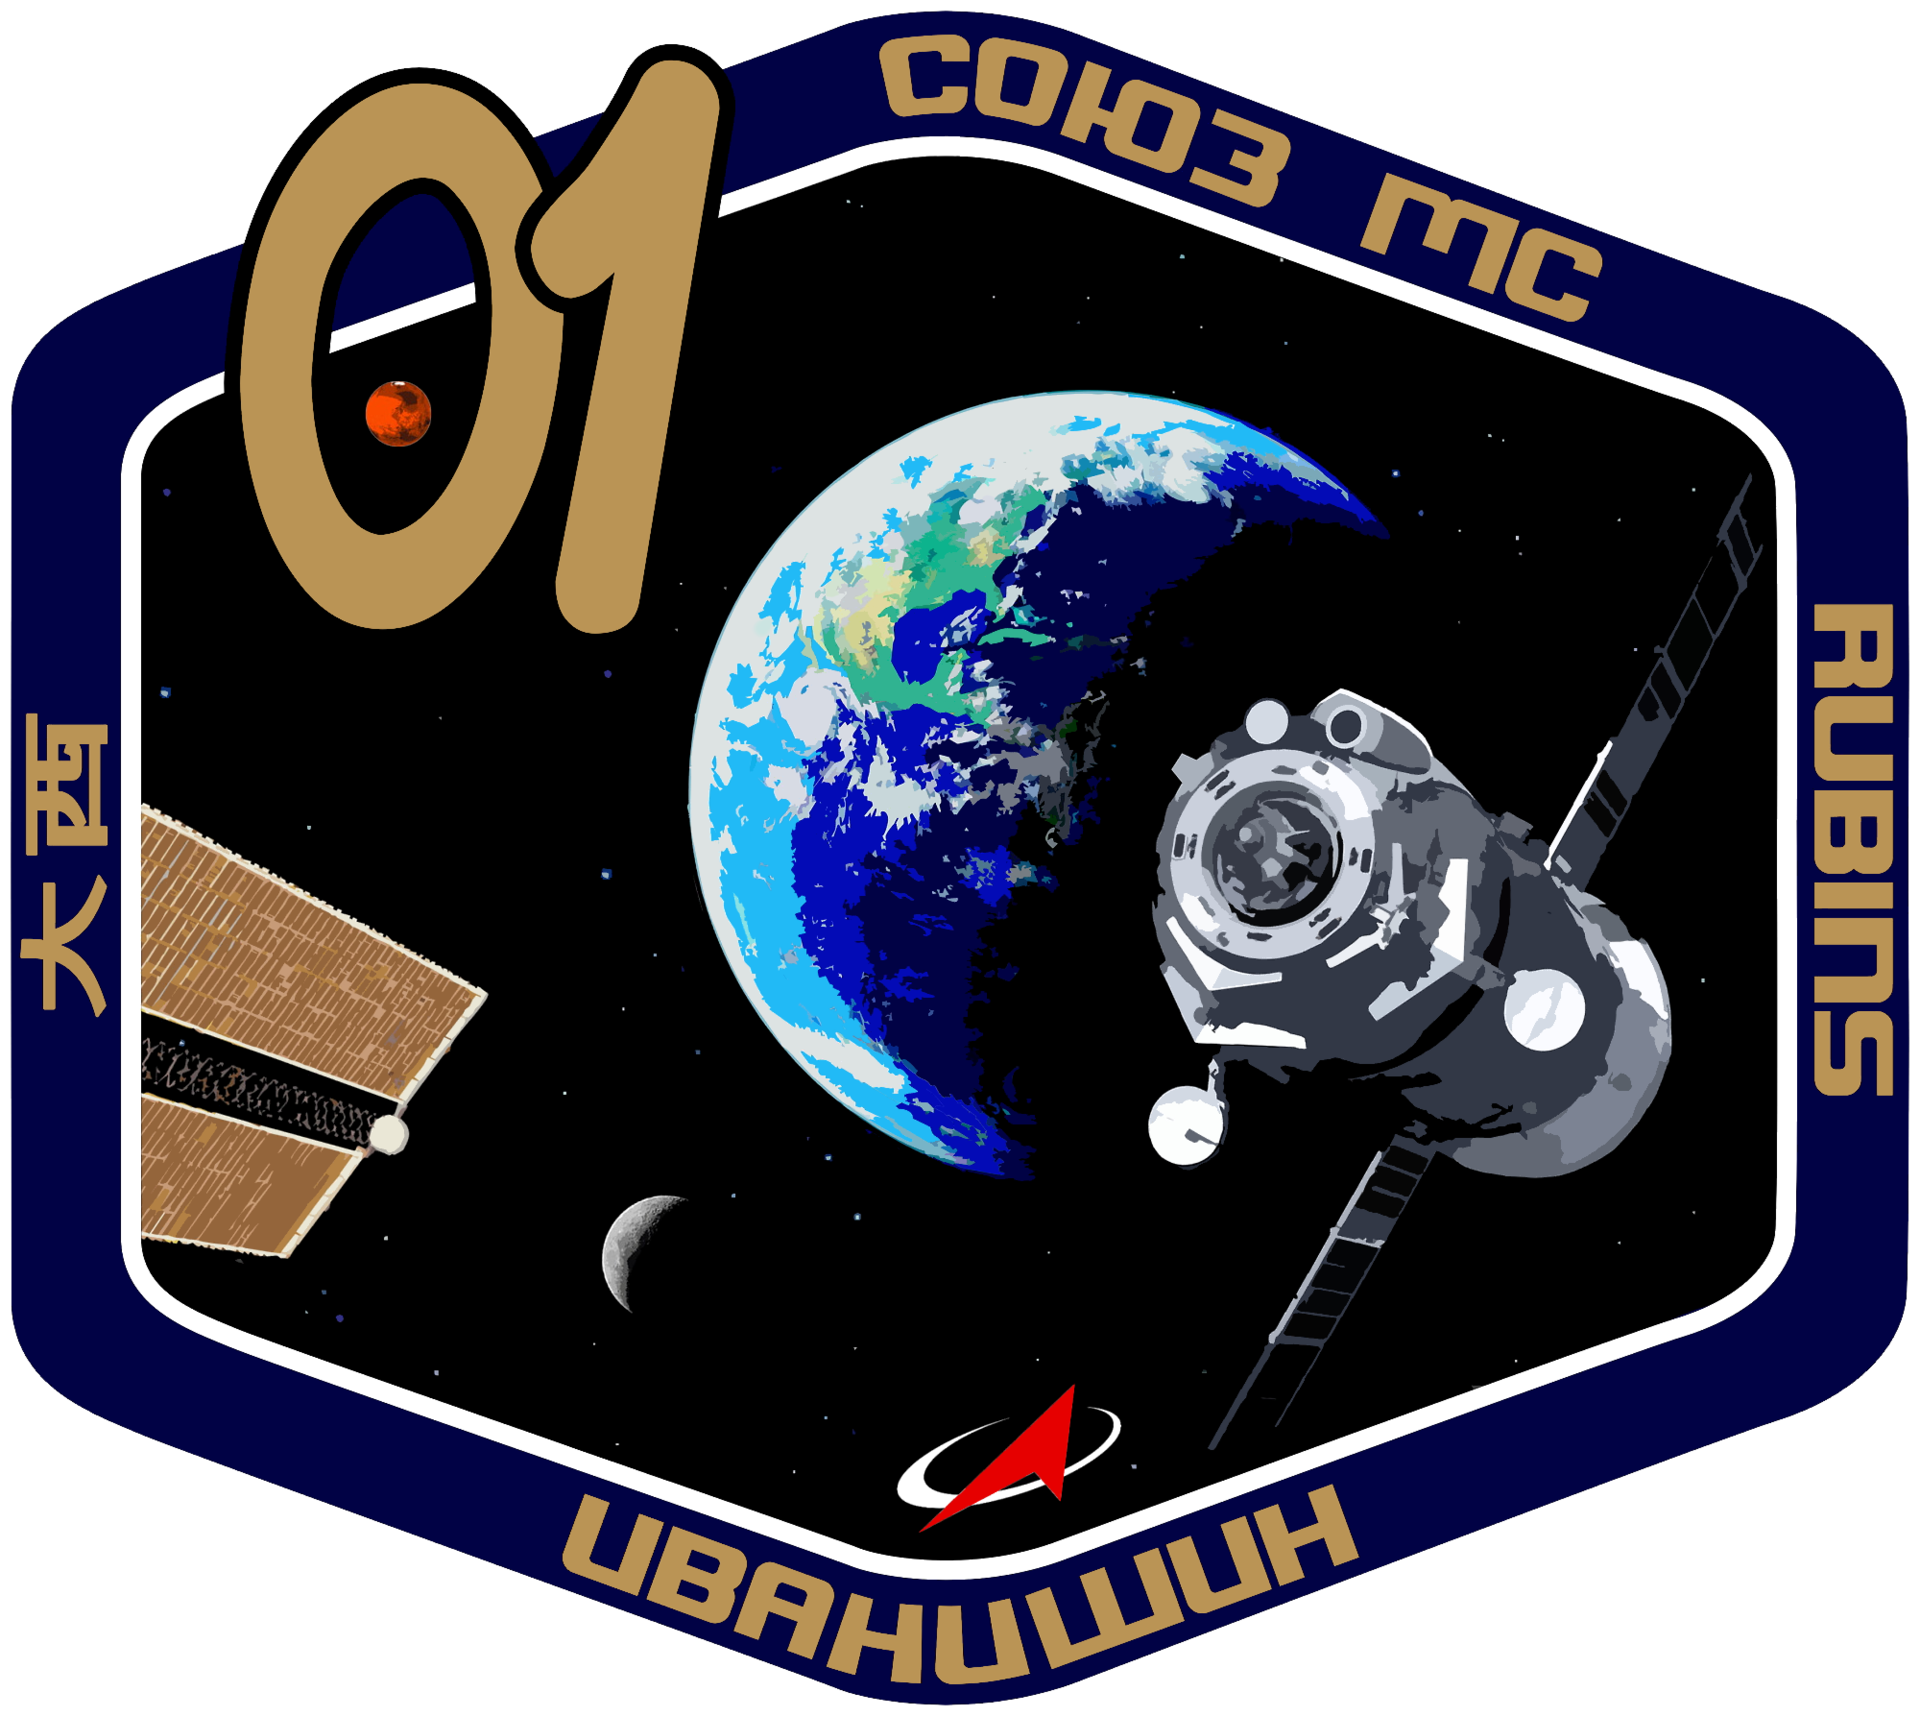 Mission patch for Soyuz MS (MS-01)